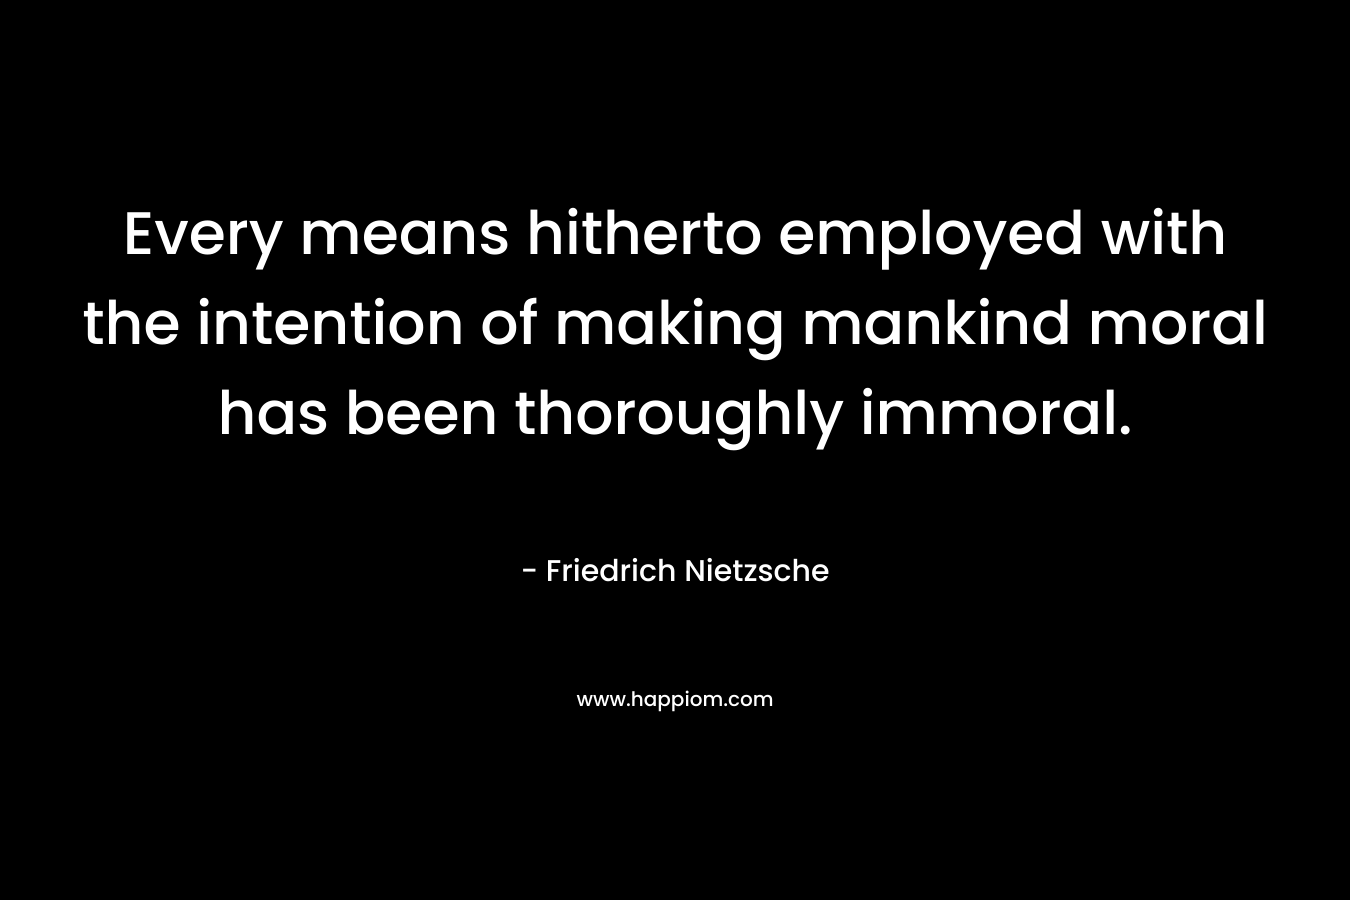 Every means hitherto employed with the intention of making mankind moral has been thoroughly immoral. – Friedrich Nietzsche